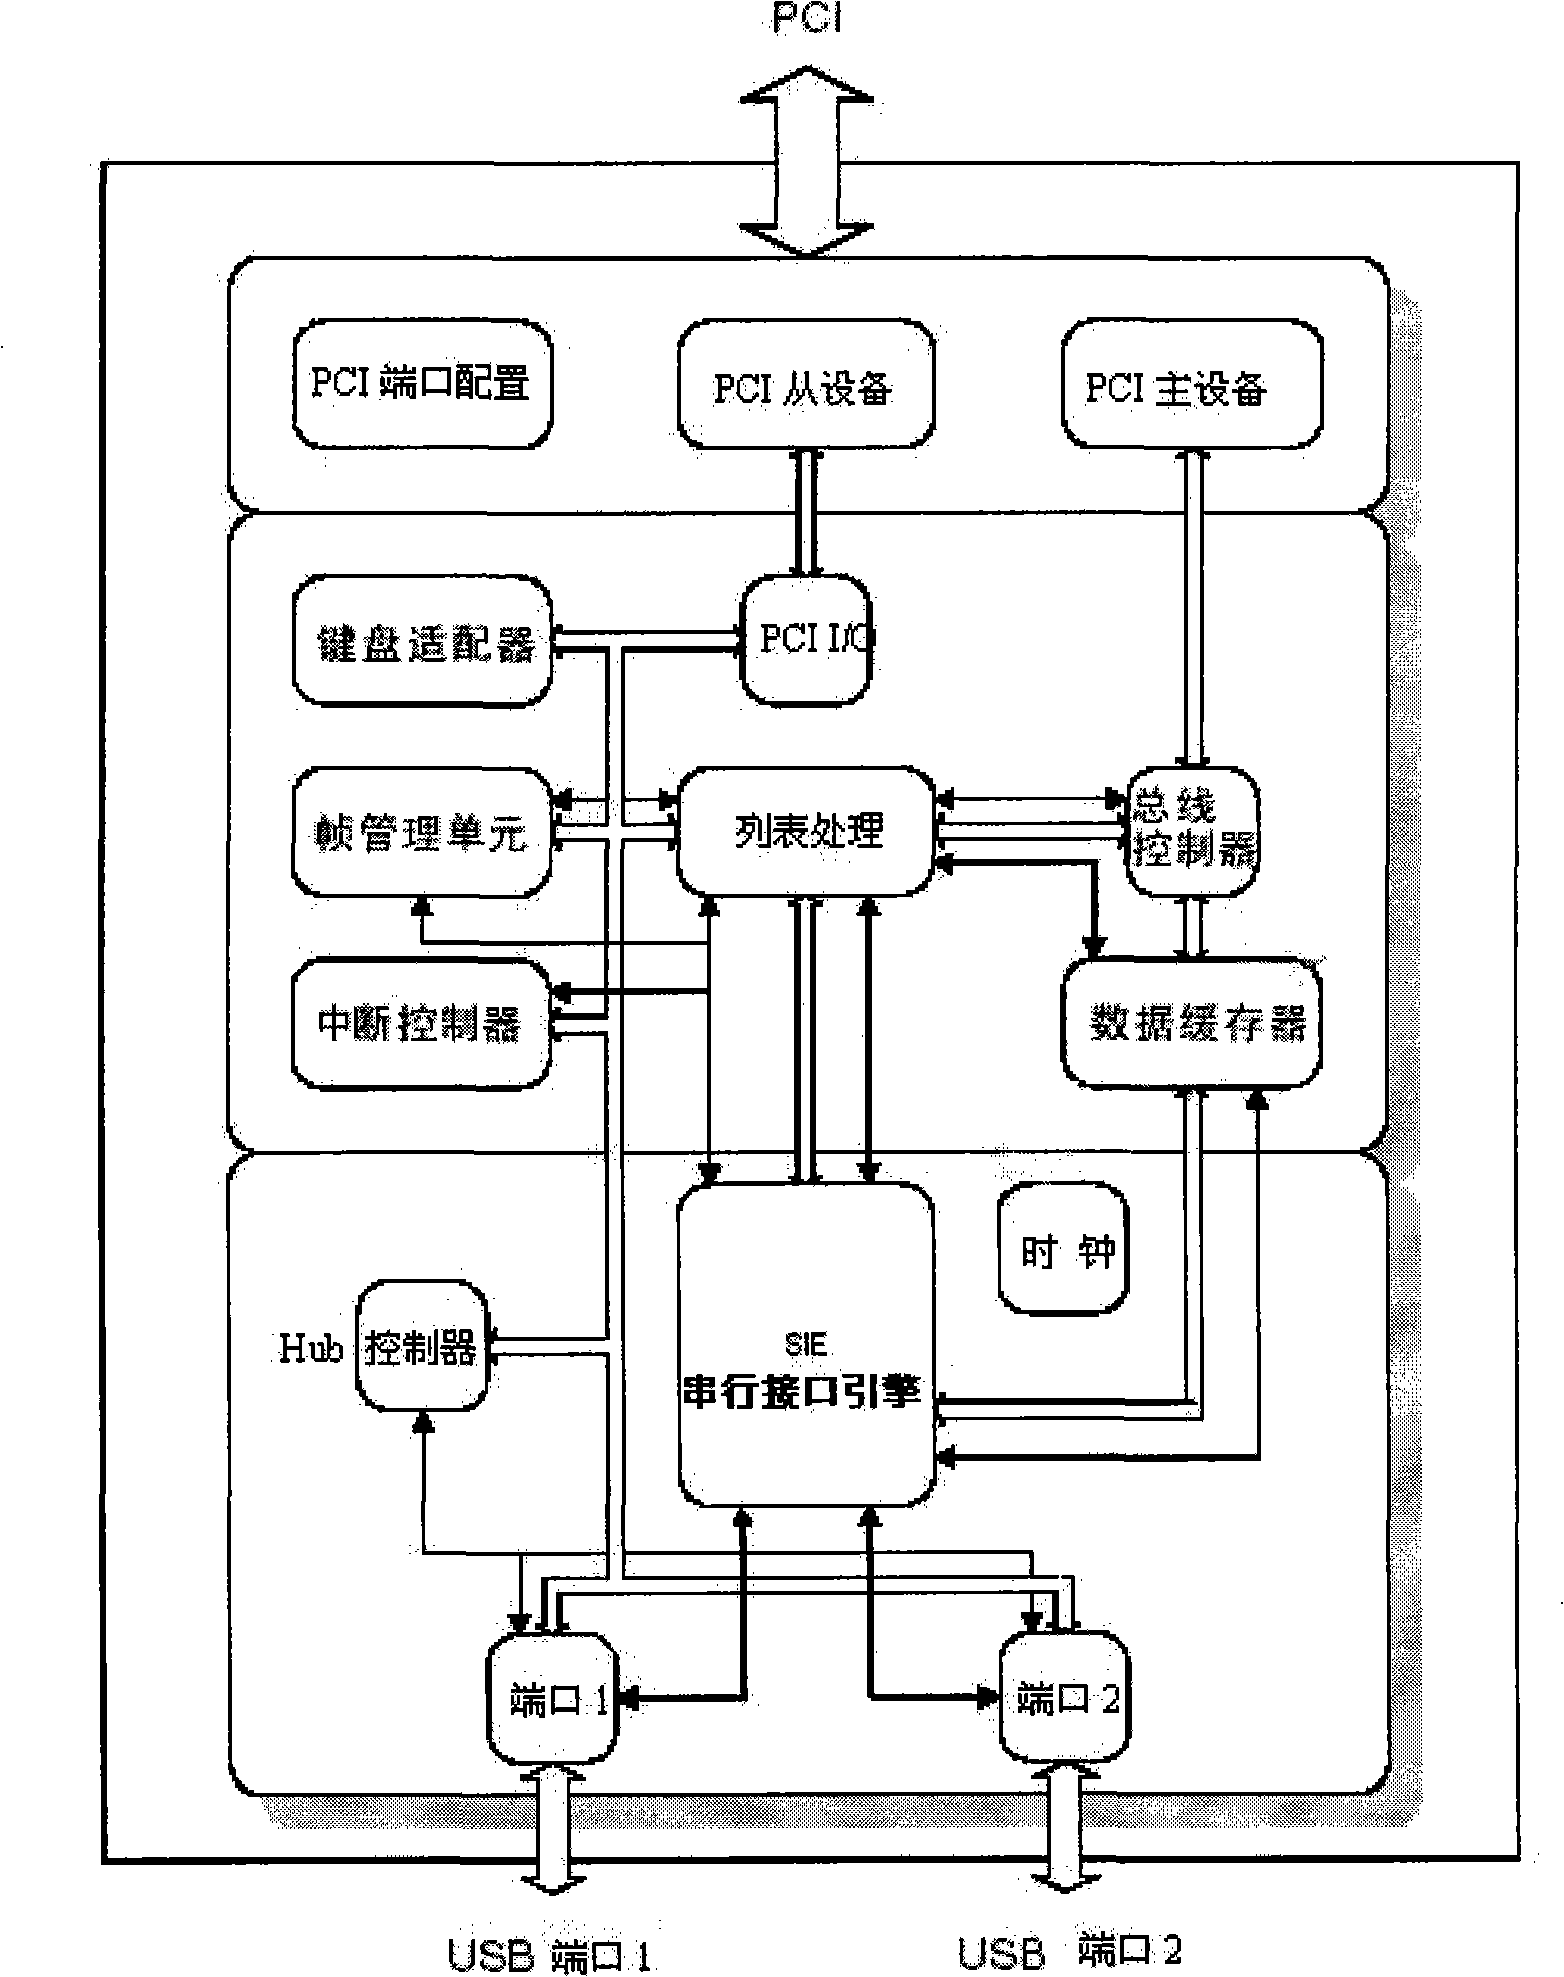 Method and interface for upgrading flash through USB interface for digital LCD TV